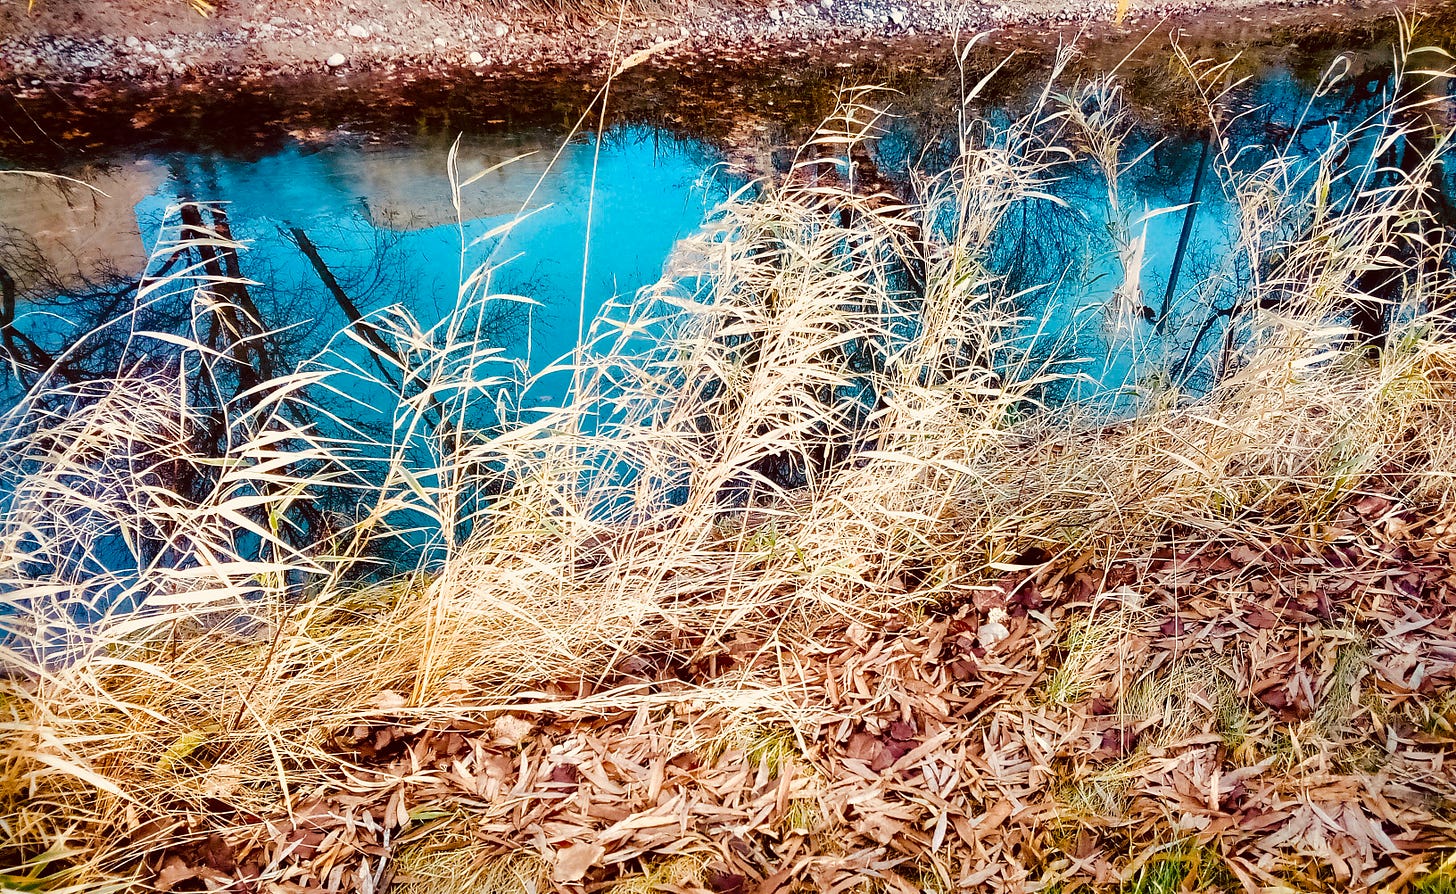 Blue water in a creek lined by golden grasses